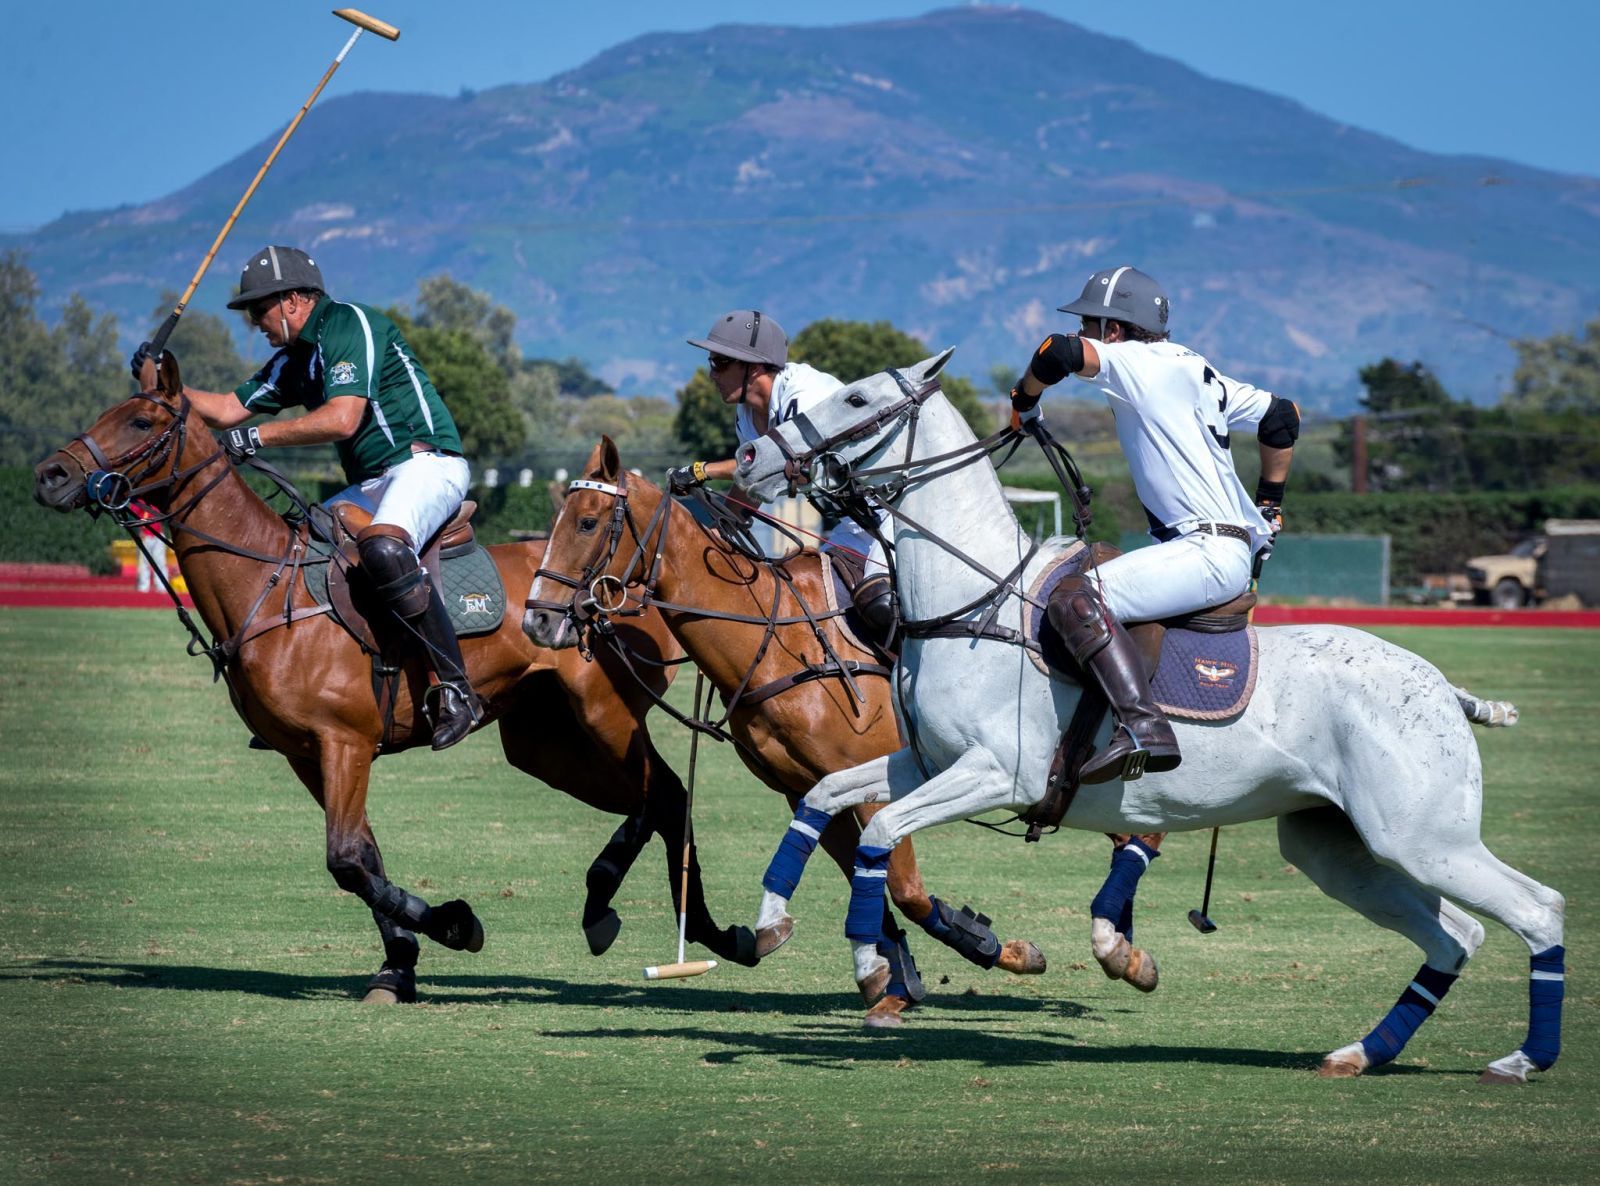 A close up of 3 polo players running on horseback during an exciting polo match.